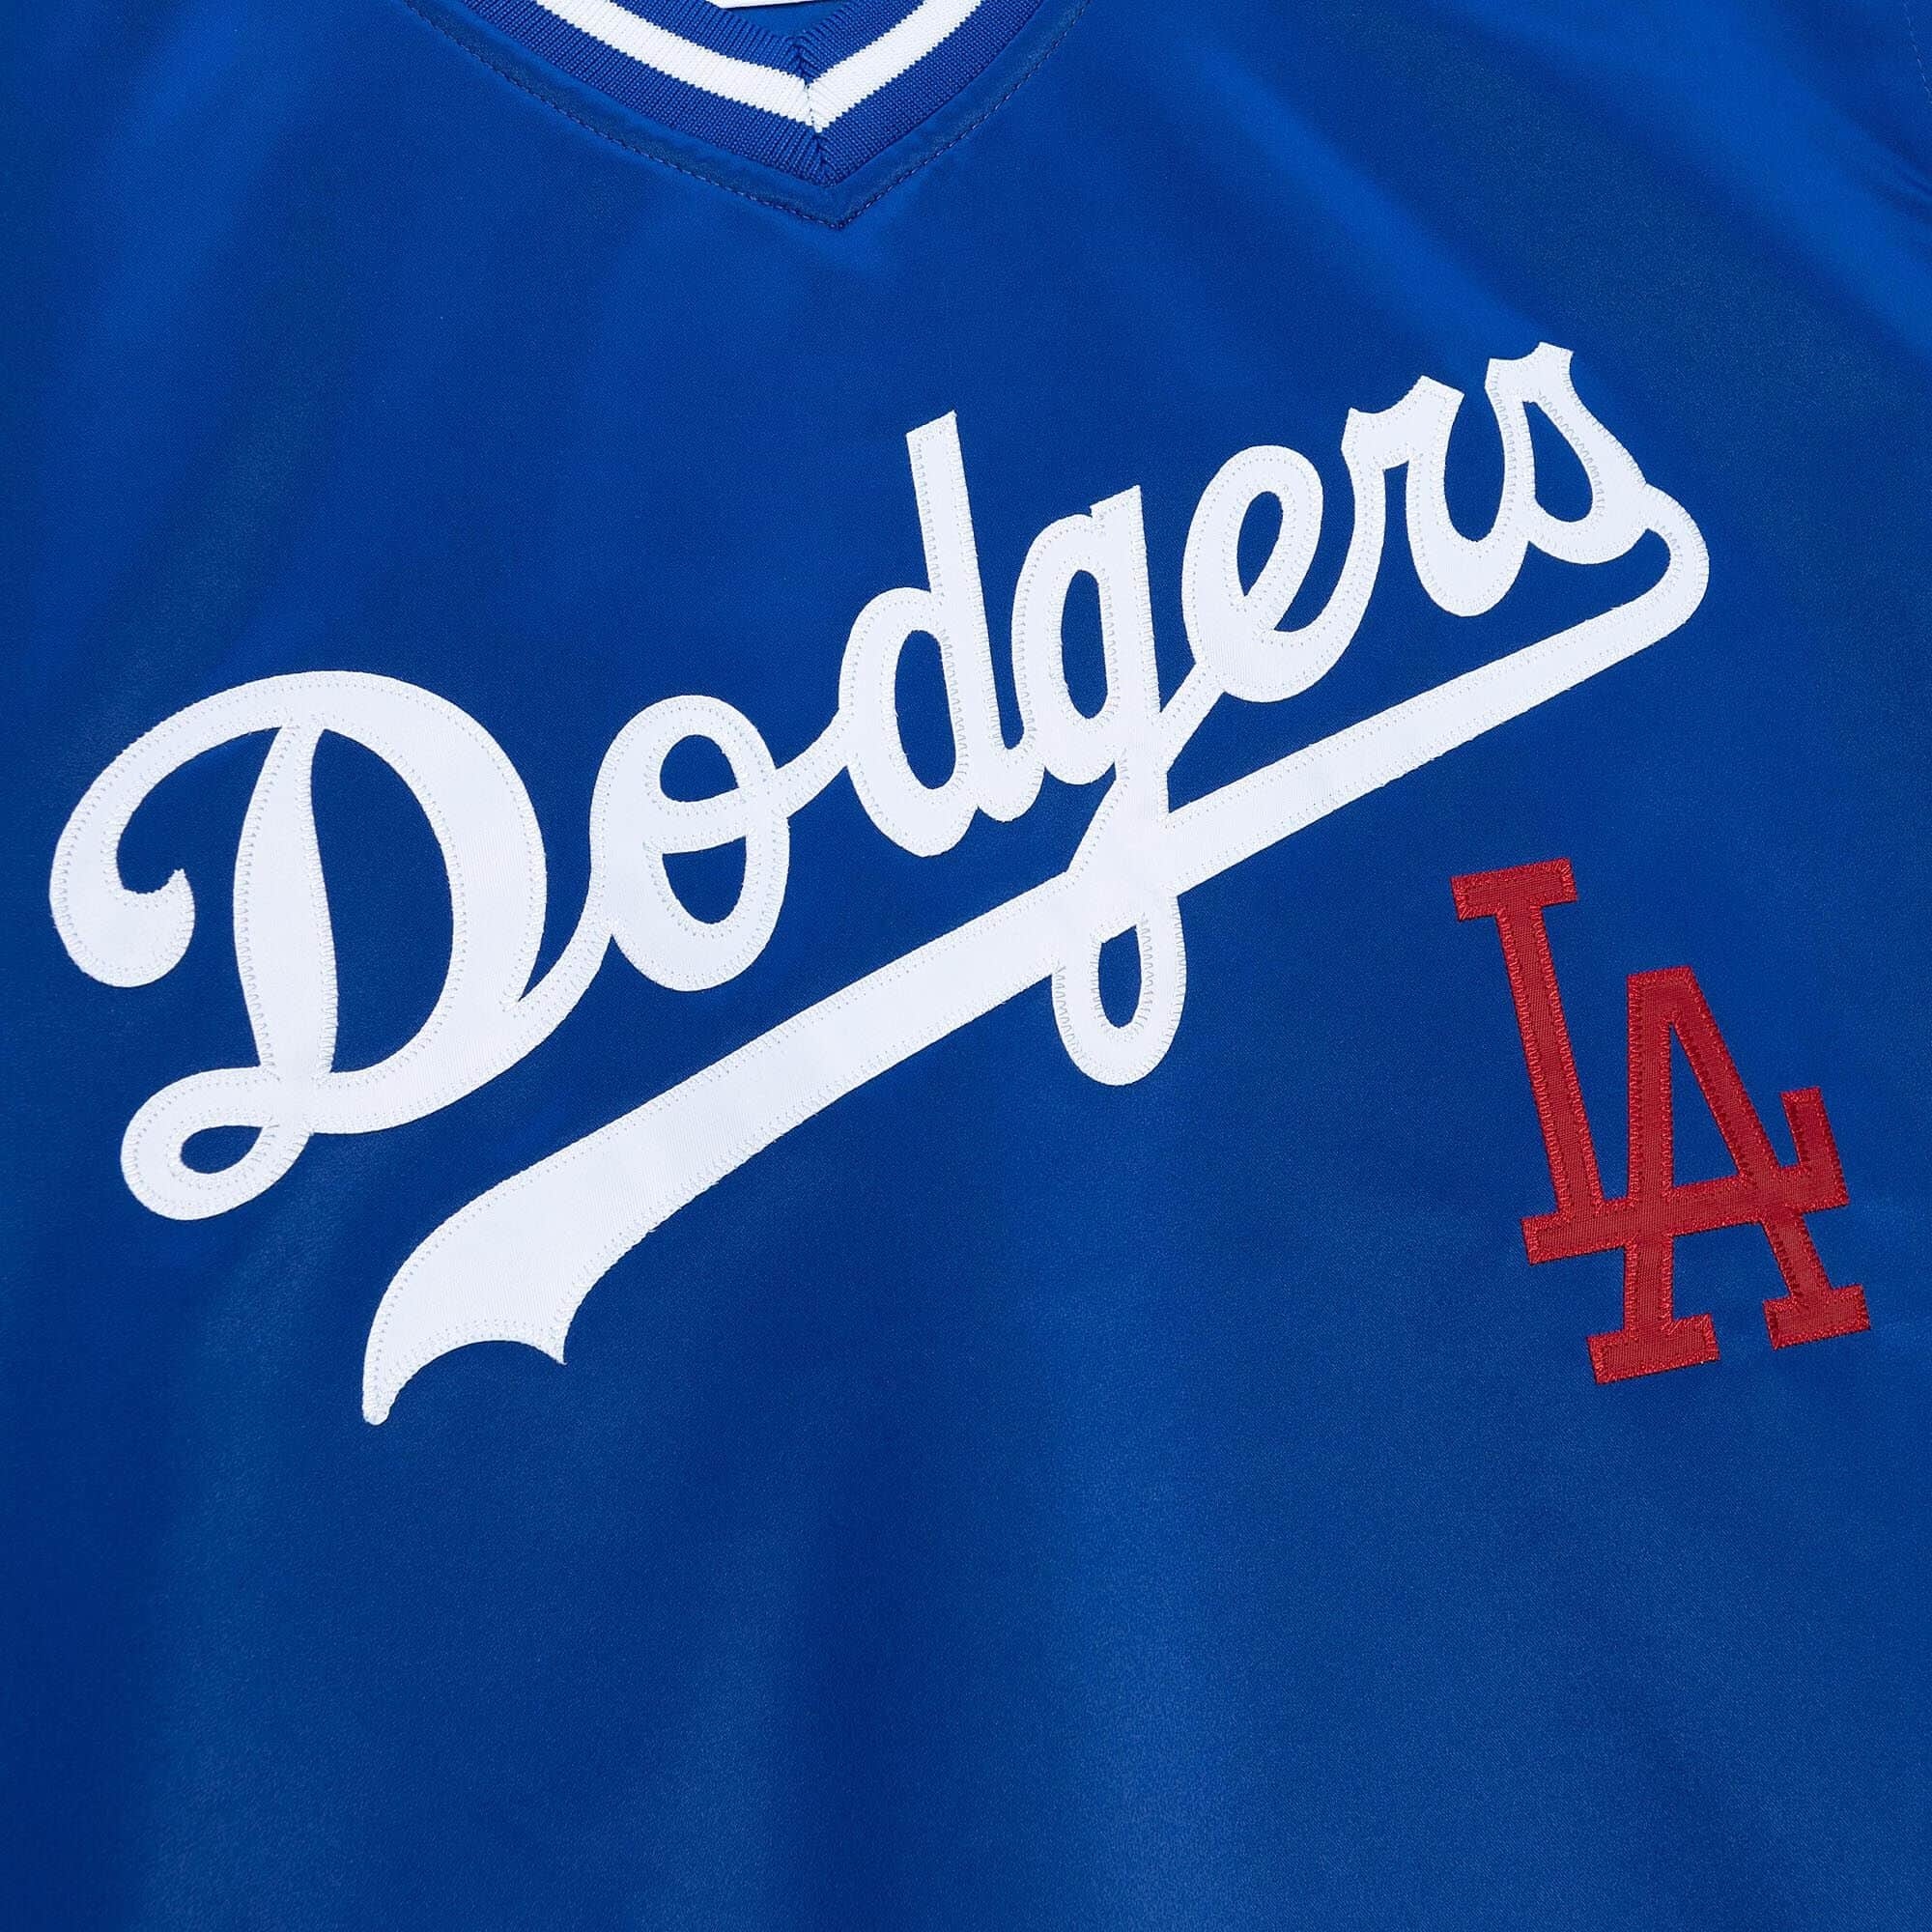 Los Angeles Dodgers Tee - Shop Mitchell & Ness Shirts and Apparel